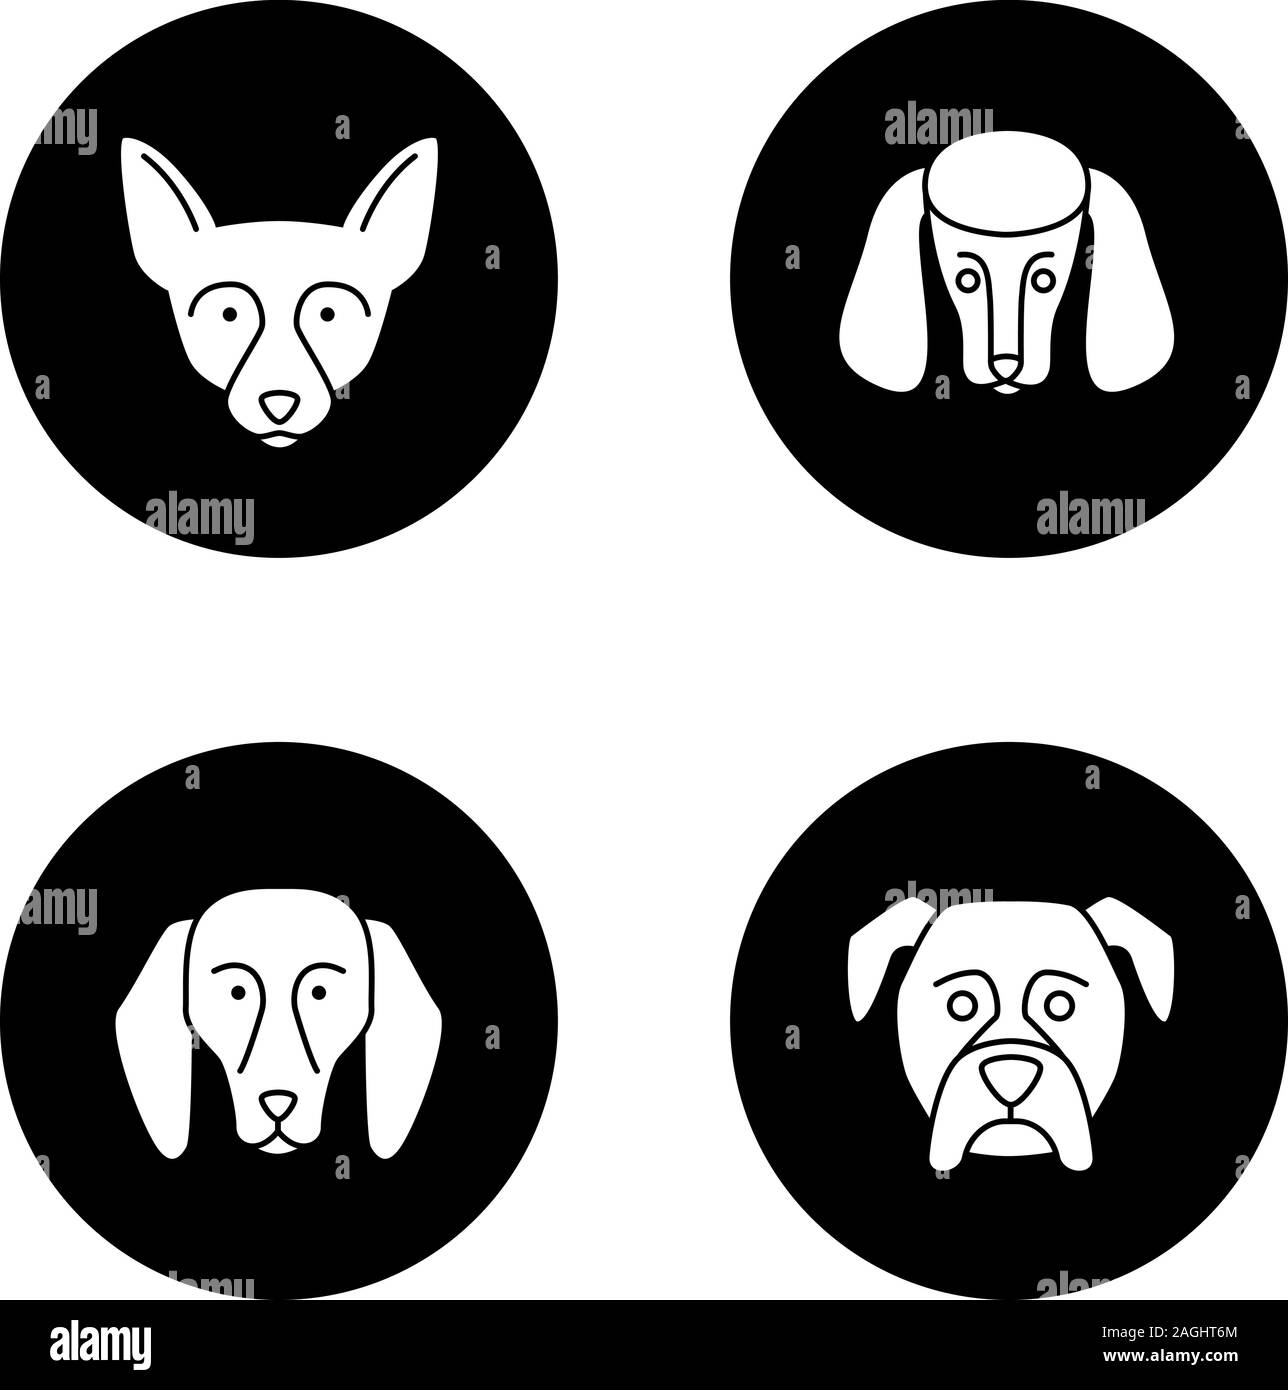 Dogs breeds glyph icons set. Chihuahua, poodle, beagle, boxer. Vector white silhouettes illustrations in black circles Stock Vector